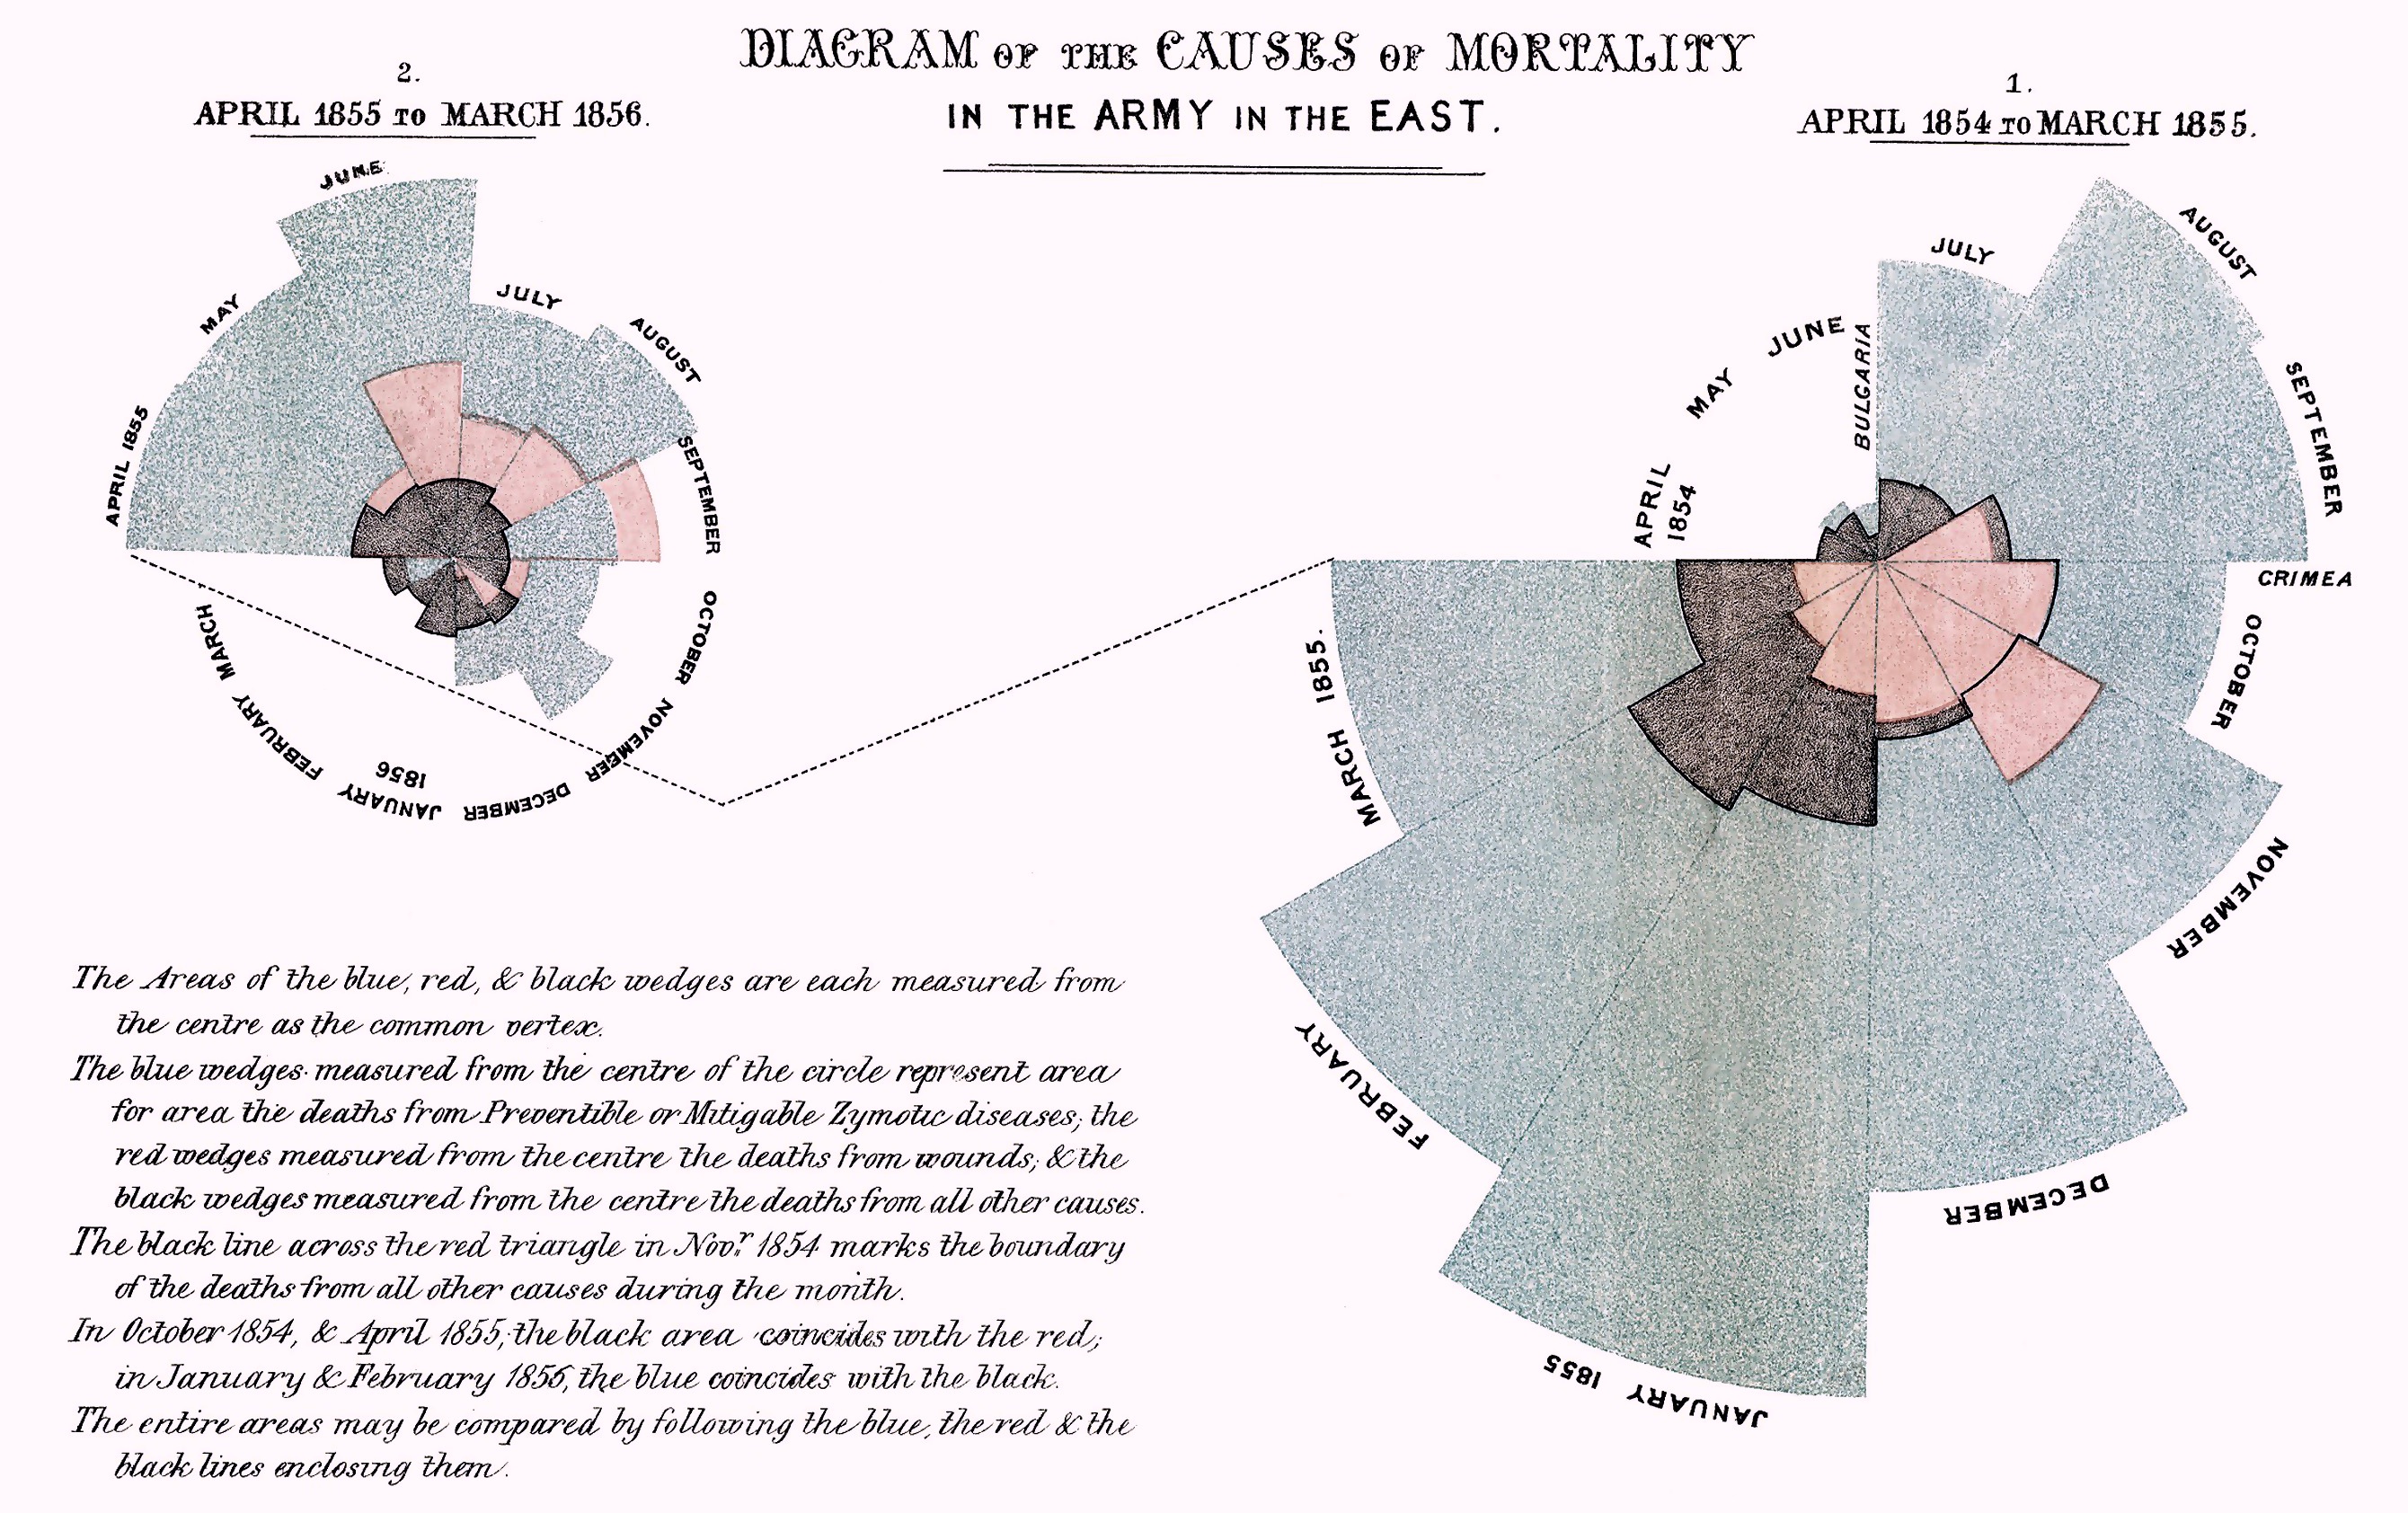 Diagram of the causes of mortality in the army in the East. Florence Nightingale,1858.